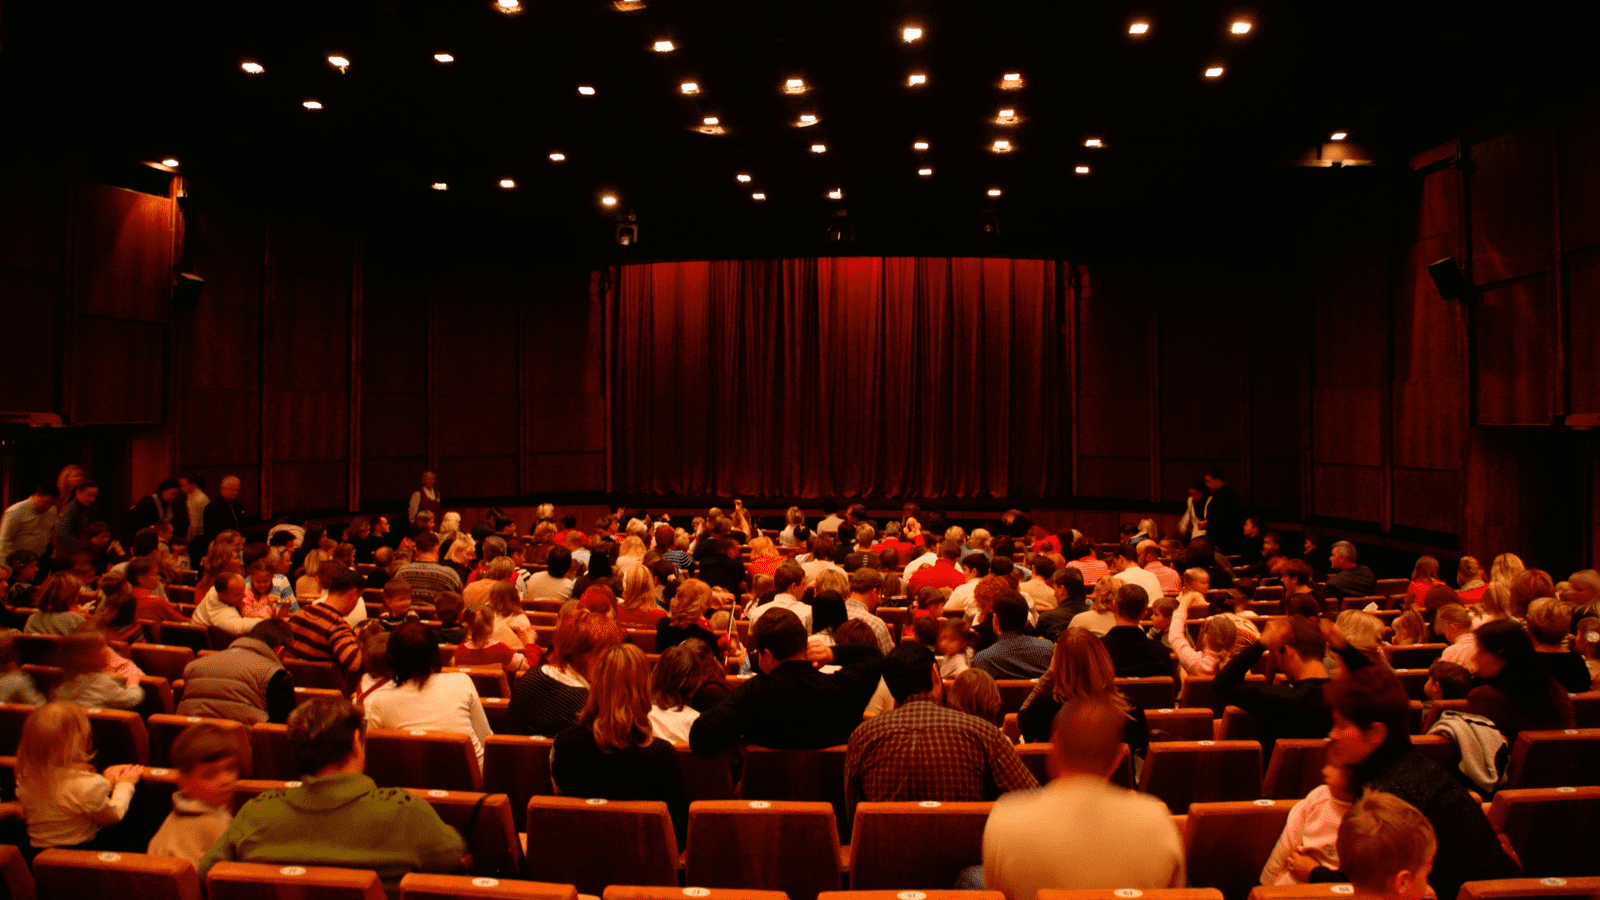 An audience in red seats in a cinema